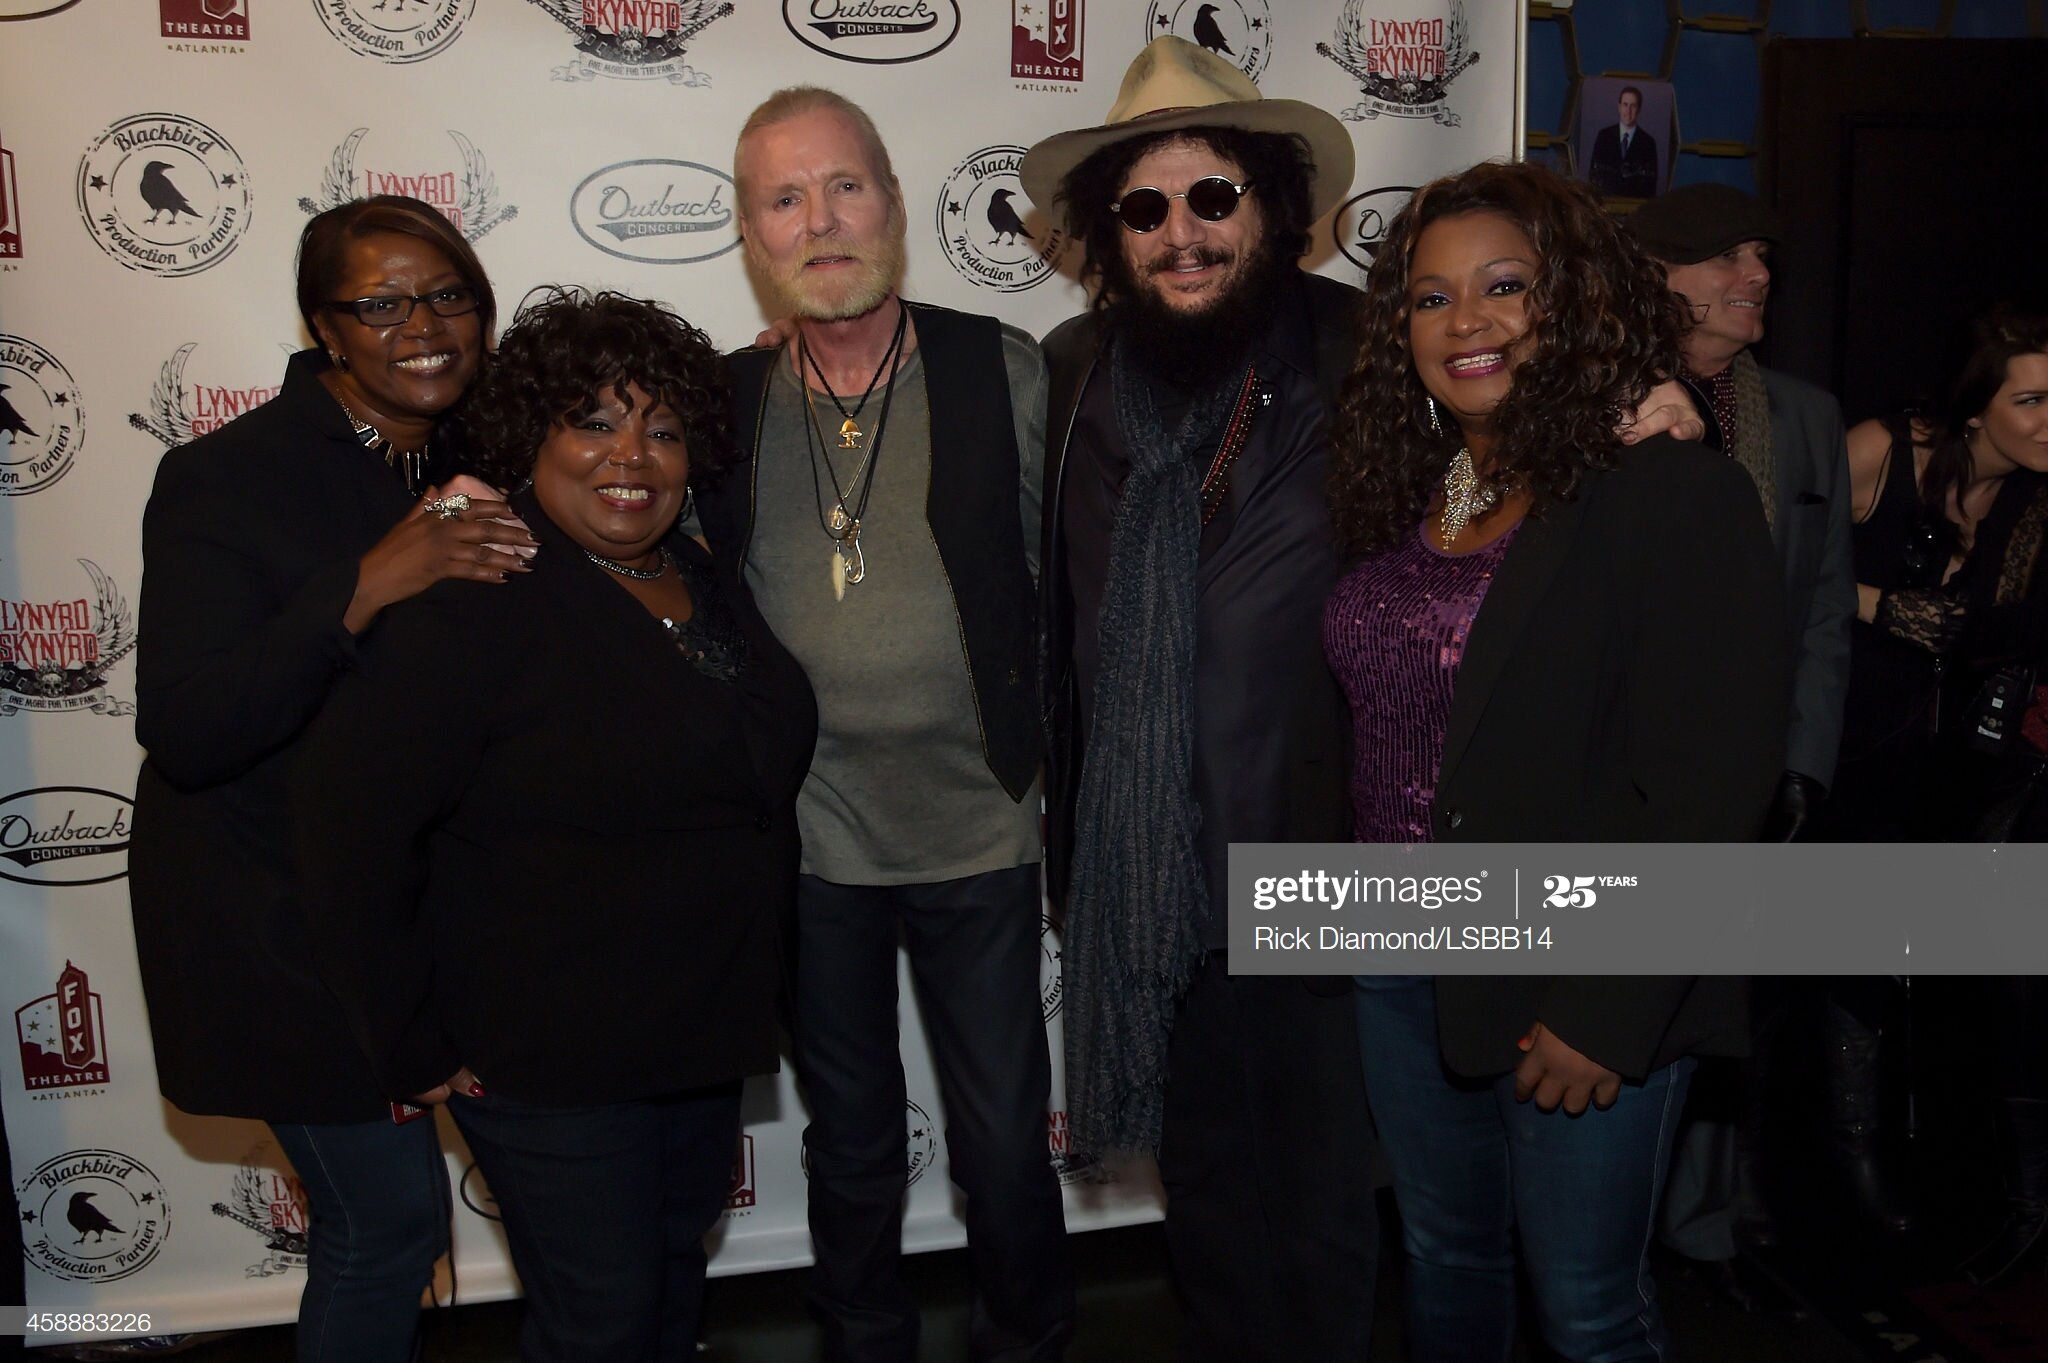 One More For The Fans! - Celebrating The Songs &amp; Music Of Lynyrd Skynyrd - Audience &amp; Backstage ATLANTA, GA - NOVEMBER 12: 